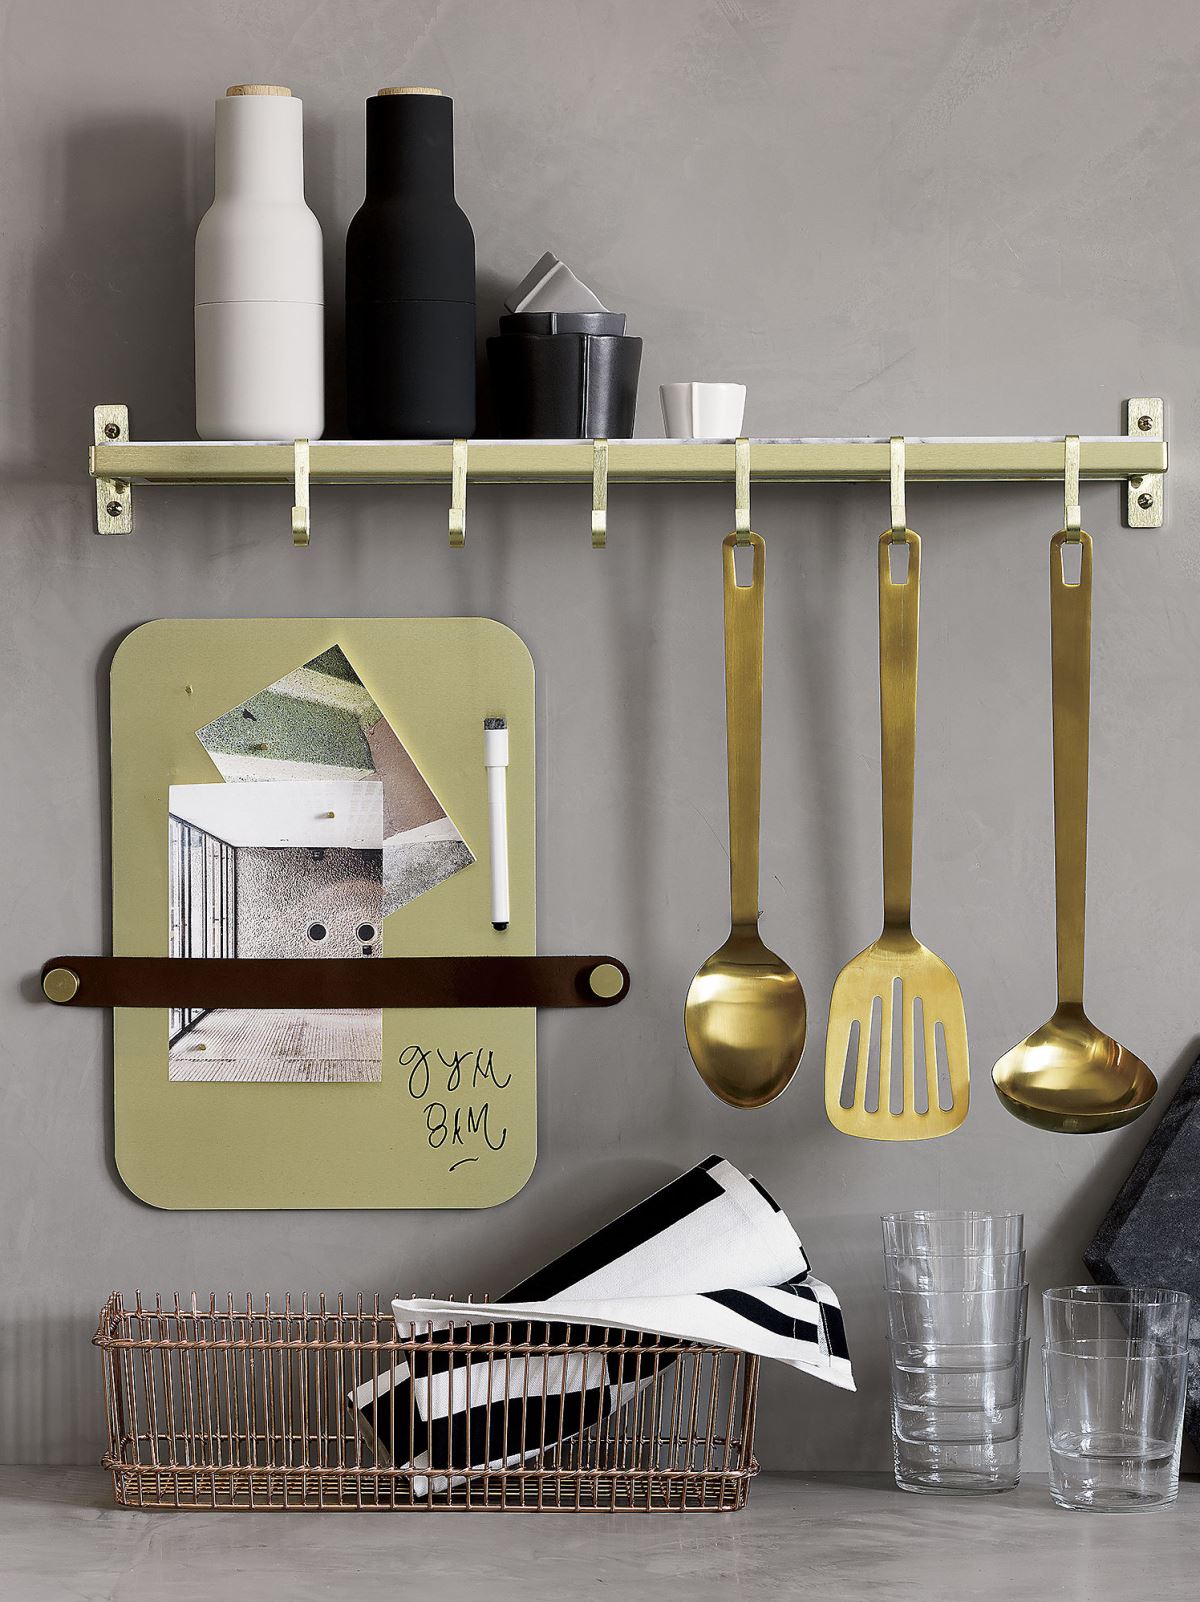 Kitchen accessories from CB2